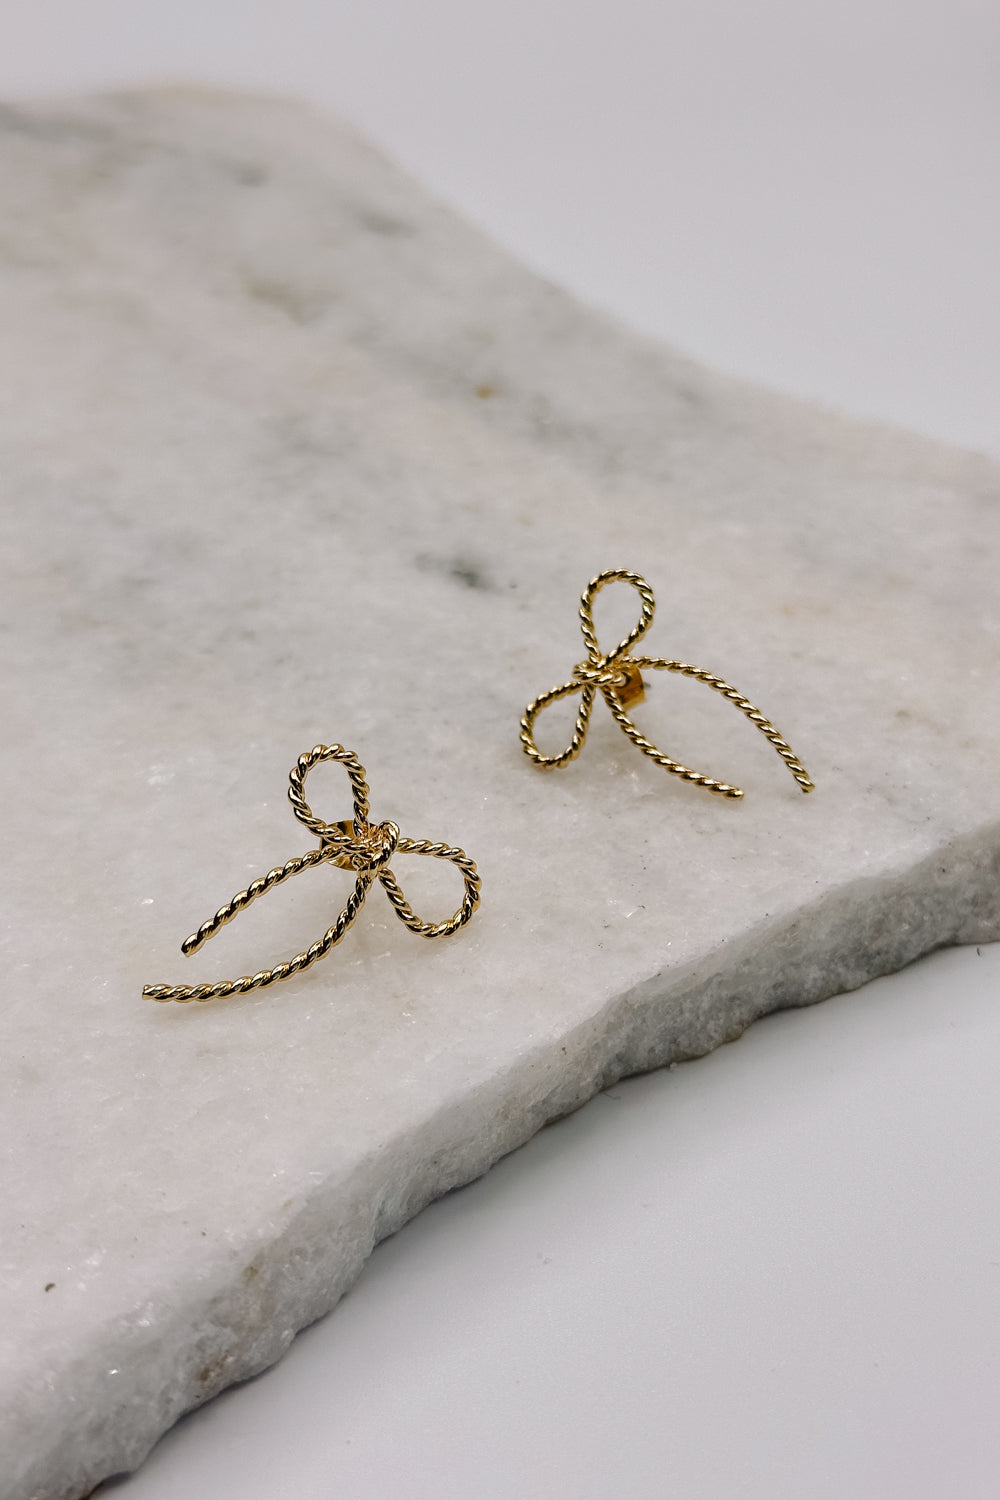 Close up view of the Alice Gold Roped Bow Stud Earring which features gold roped bow shaped studs